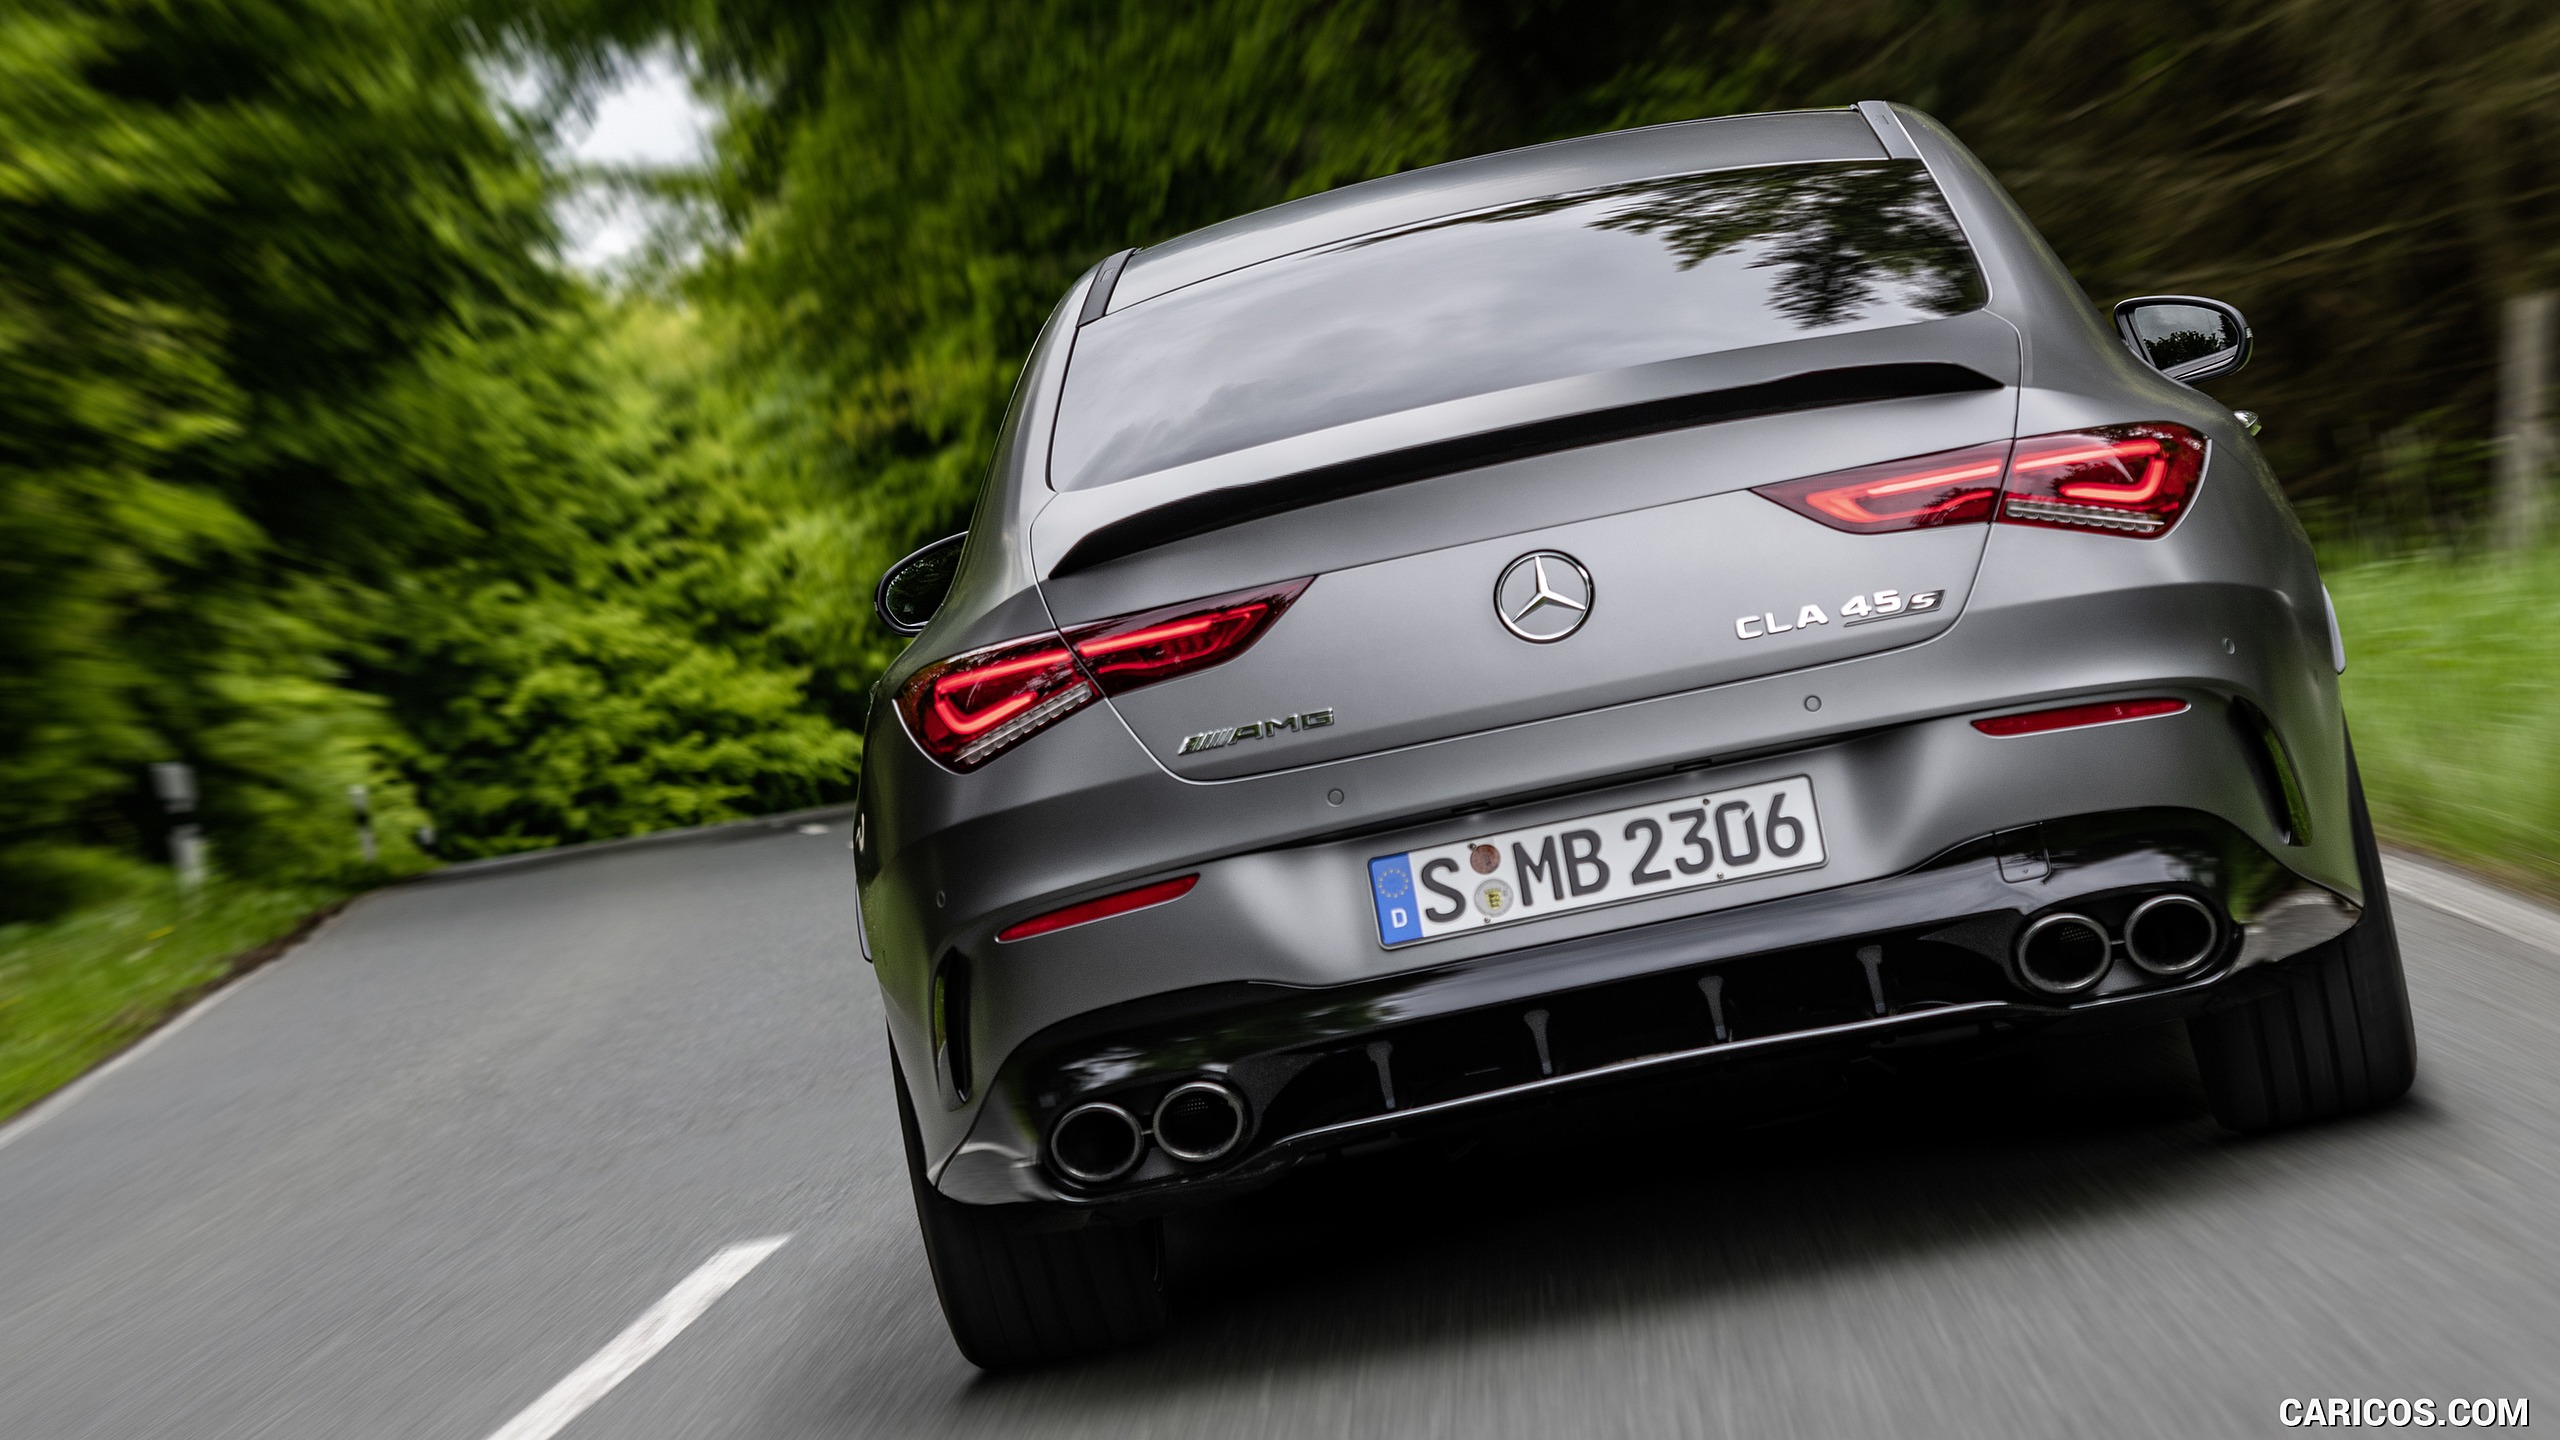 2020 Mercedes-AMG CLA 45 S 4MATIC+ - Rear, #15 of 159